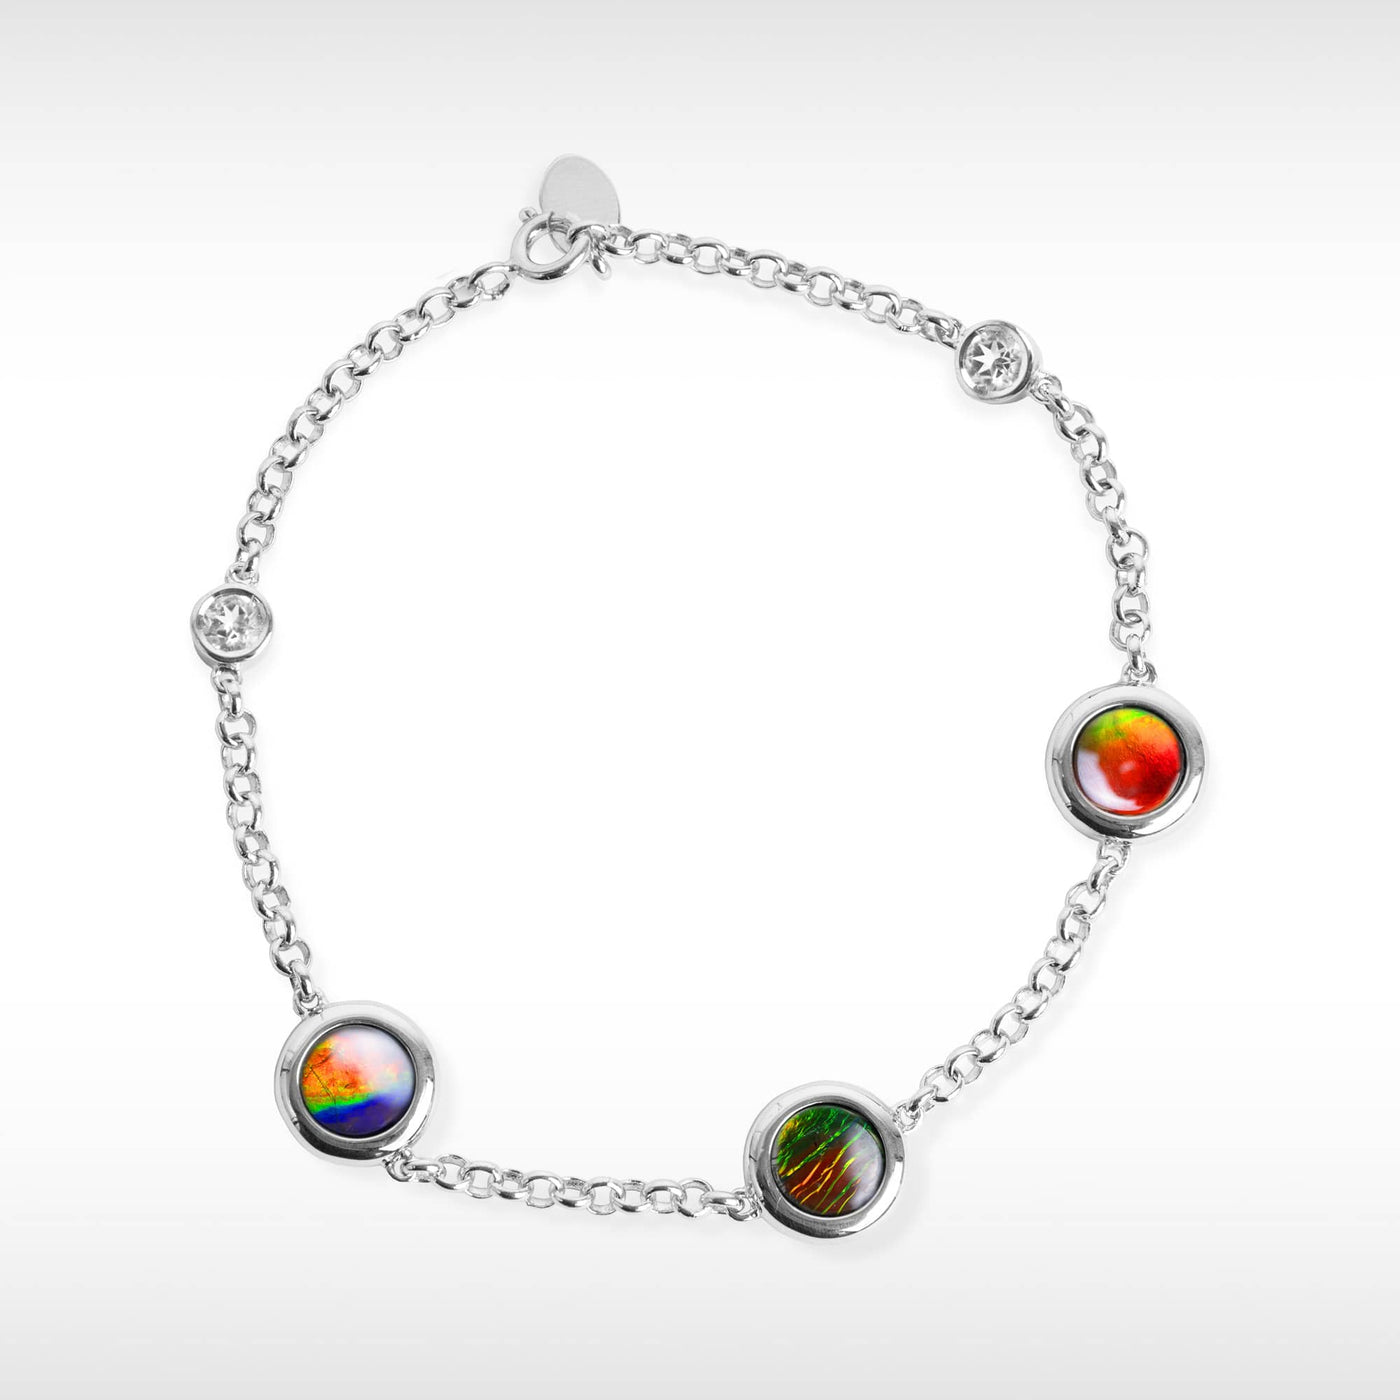 Women's Sterling Silver Ammolite Bracelet with White Topaz Accent